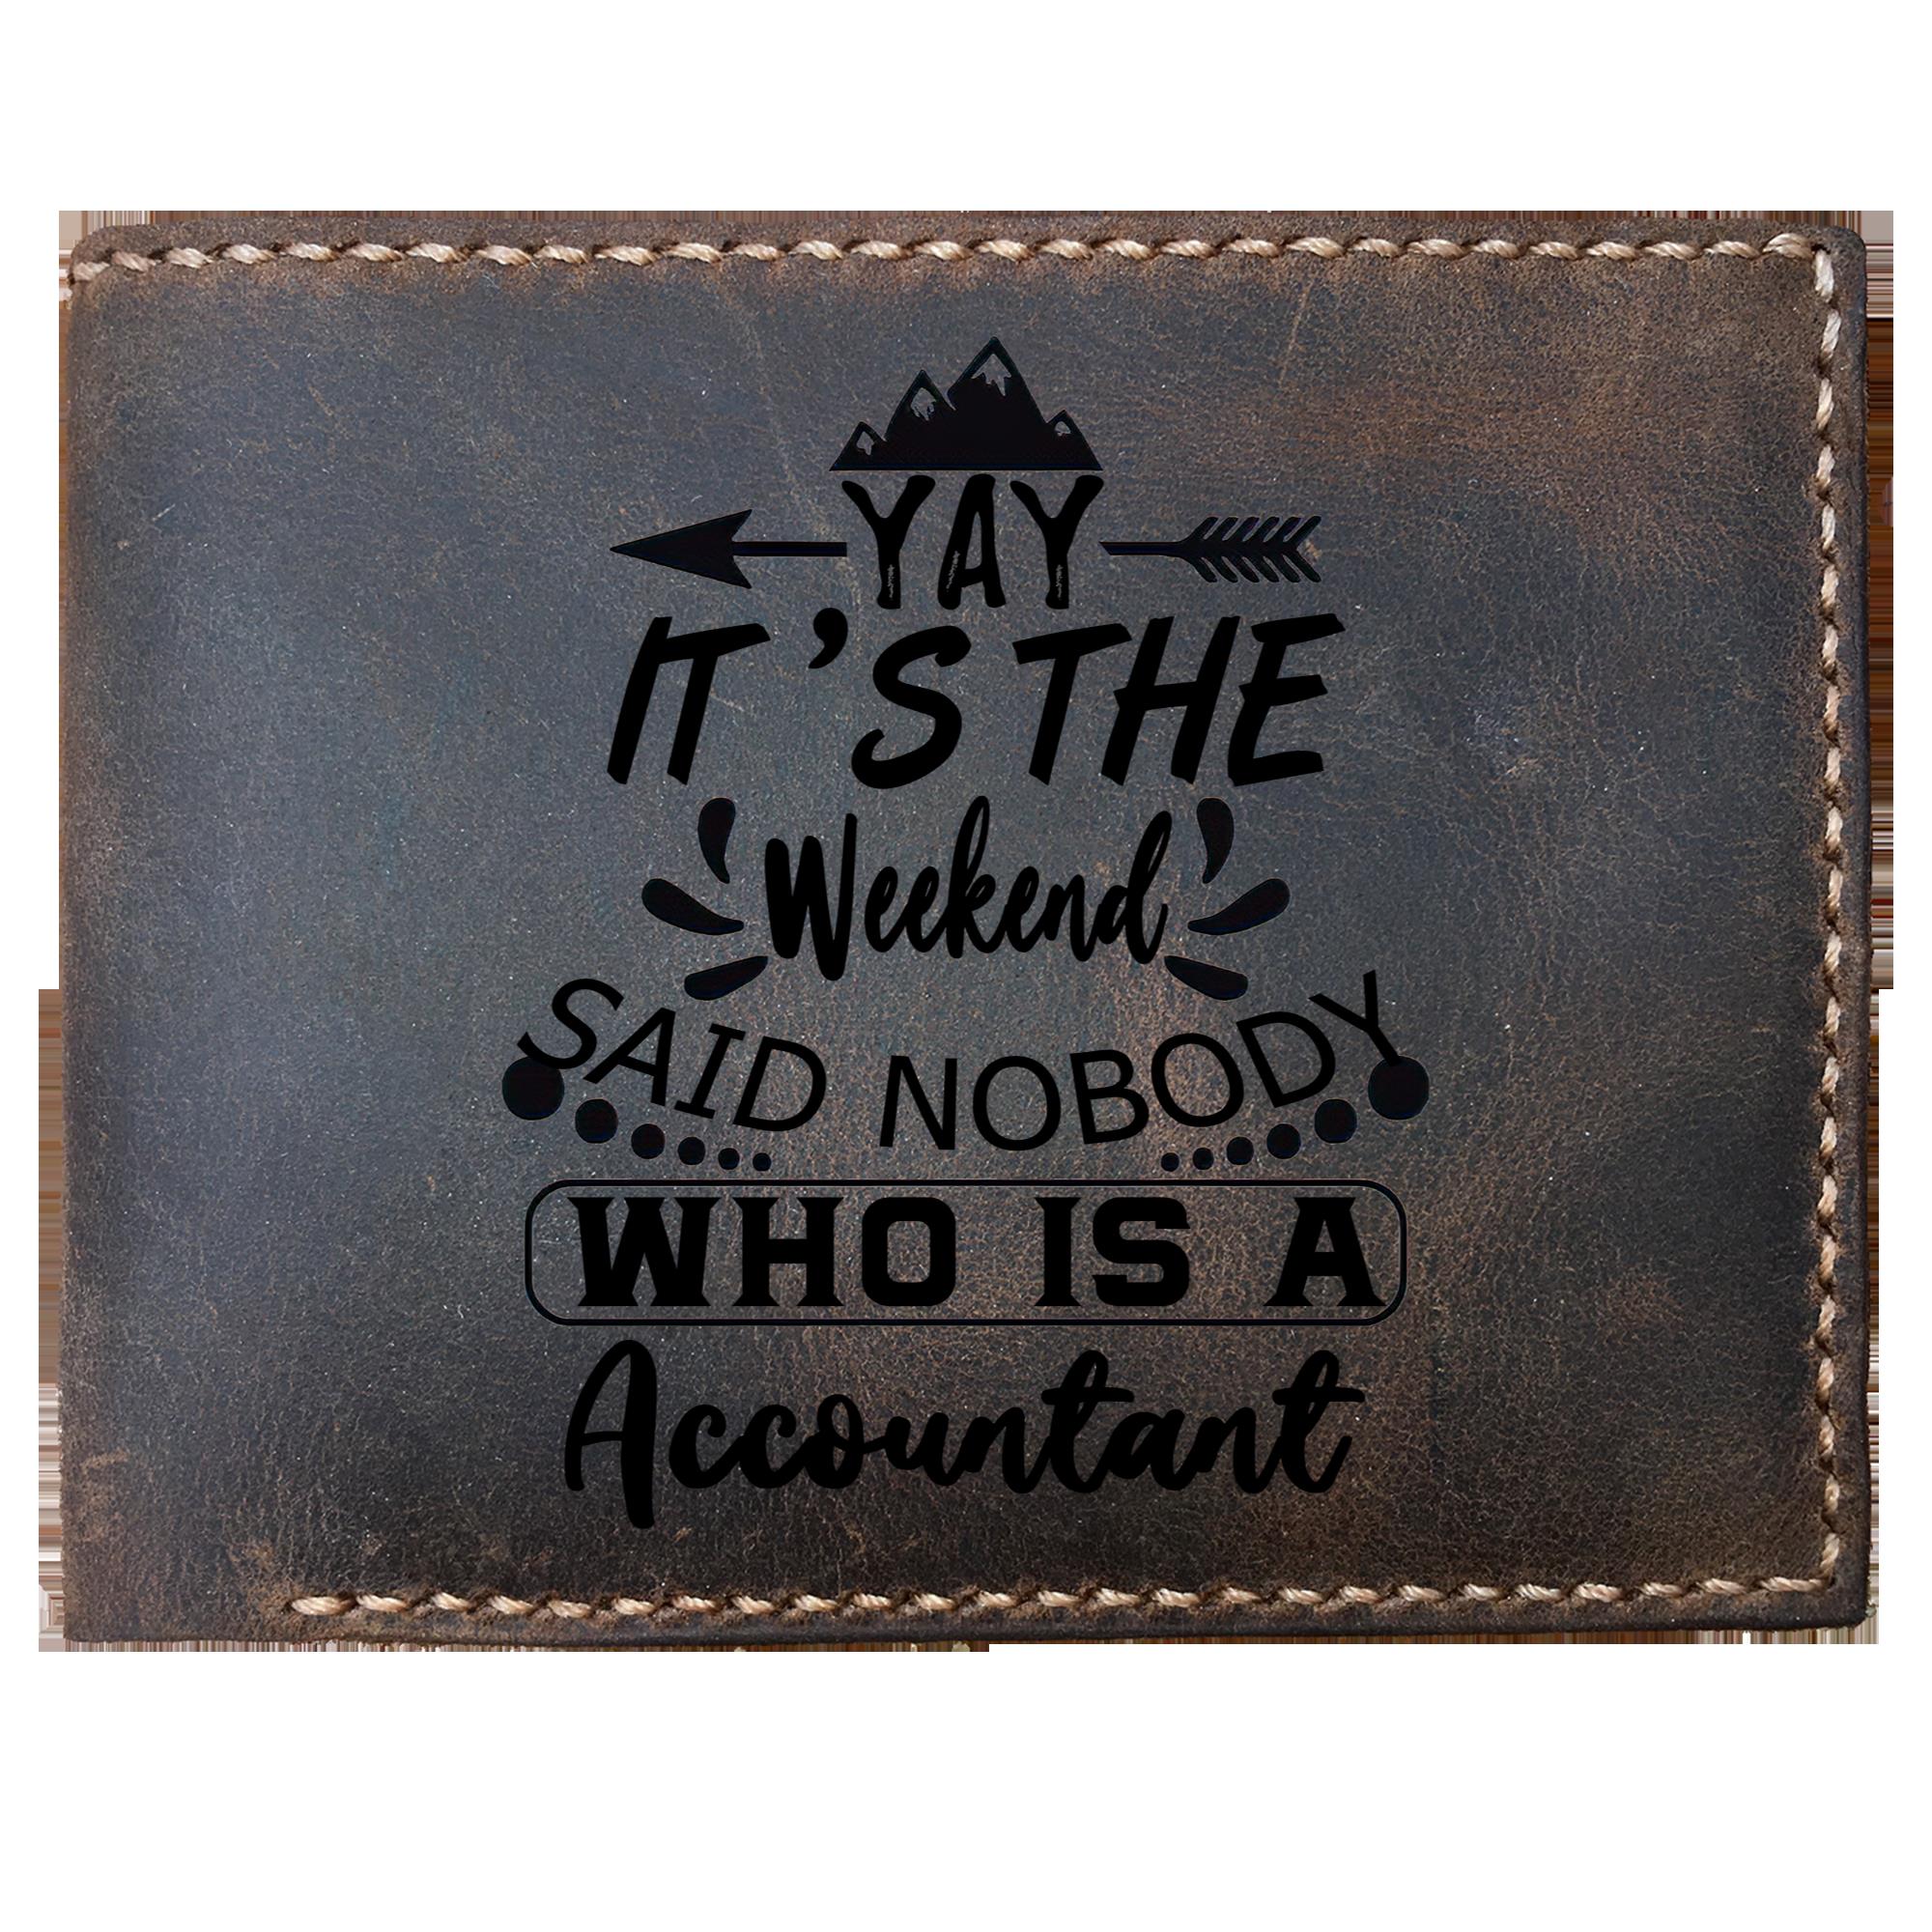 Skitongifts Funny Custom Laser Engraved Bifold Leather Wallet For Men, It's The Weekend Said Nobody Who Is A Accountant, Father's Day Gifts